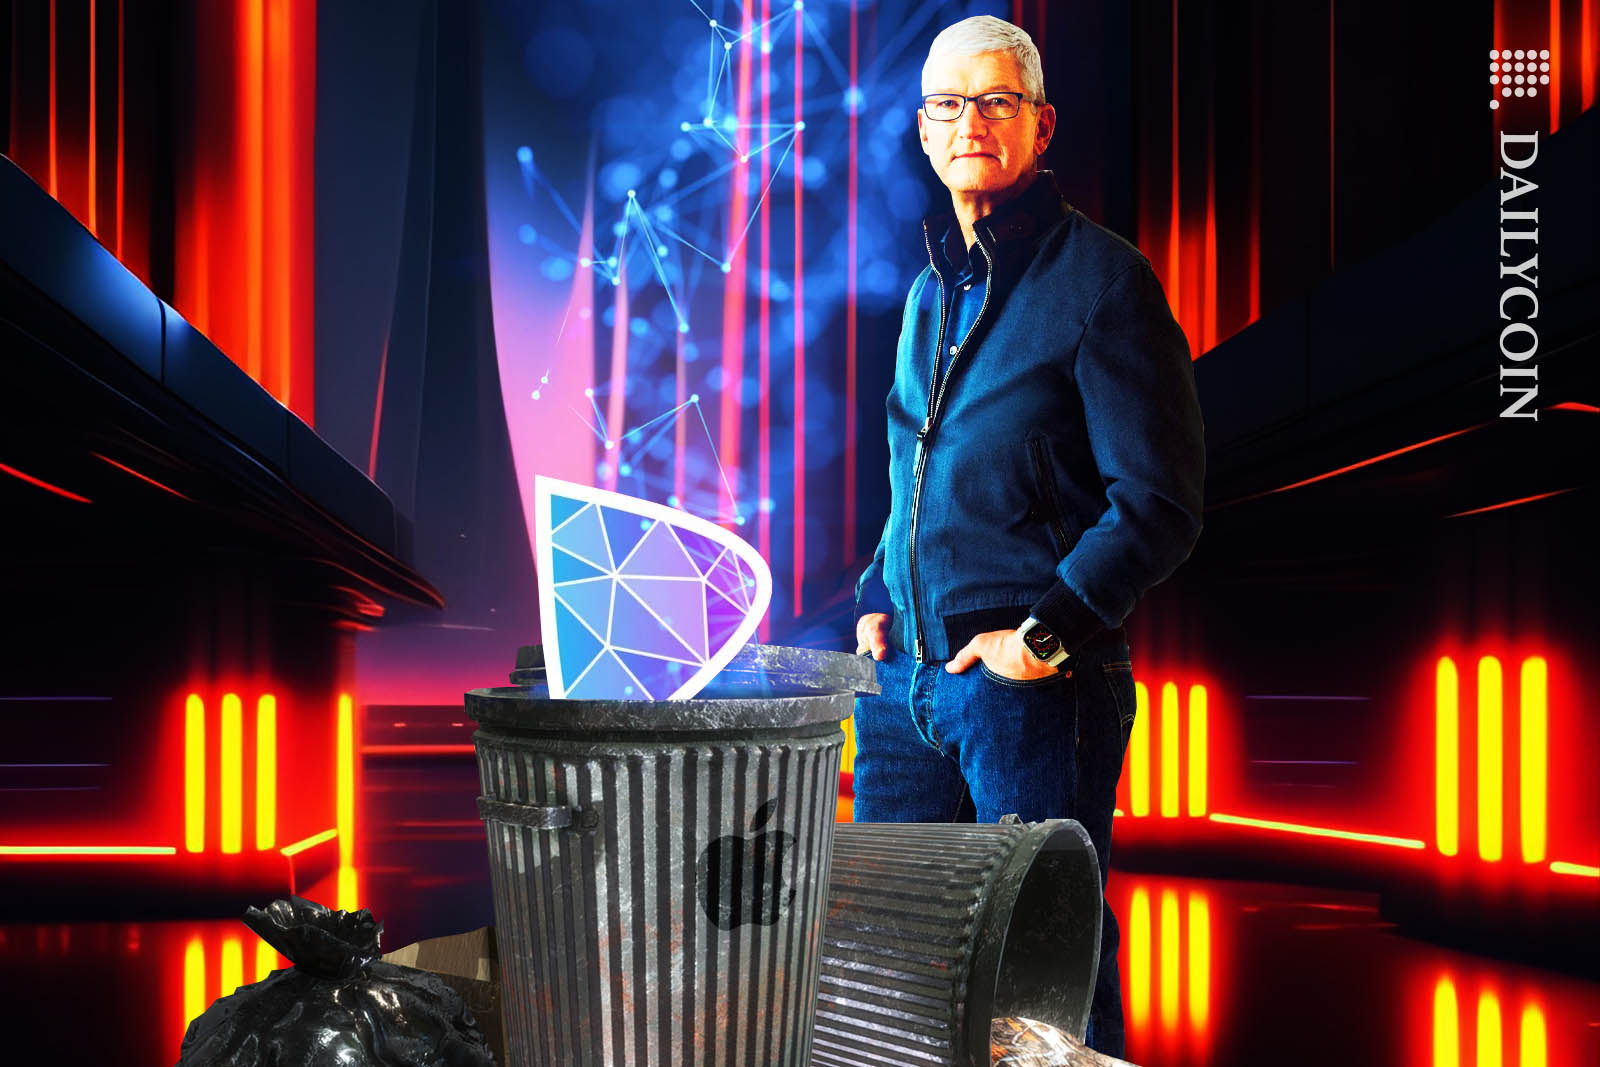 Tim Cook standing next to a pile of trash, with a Damus logo in one of the bins.